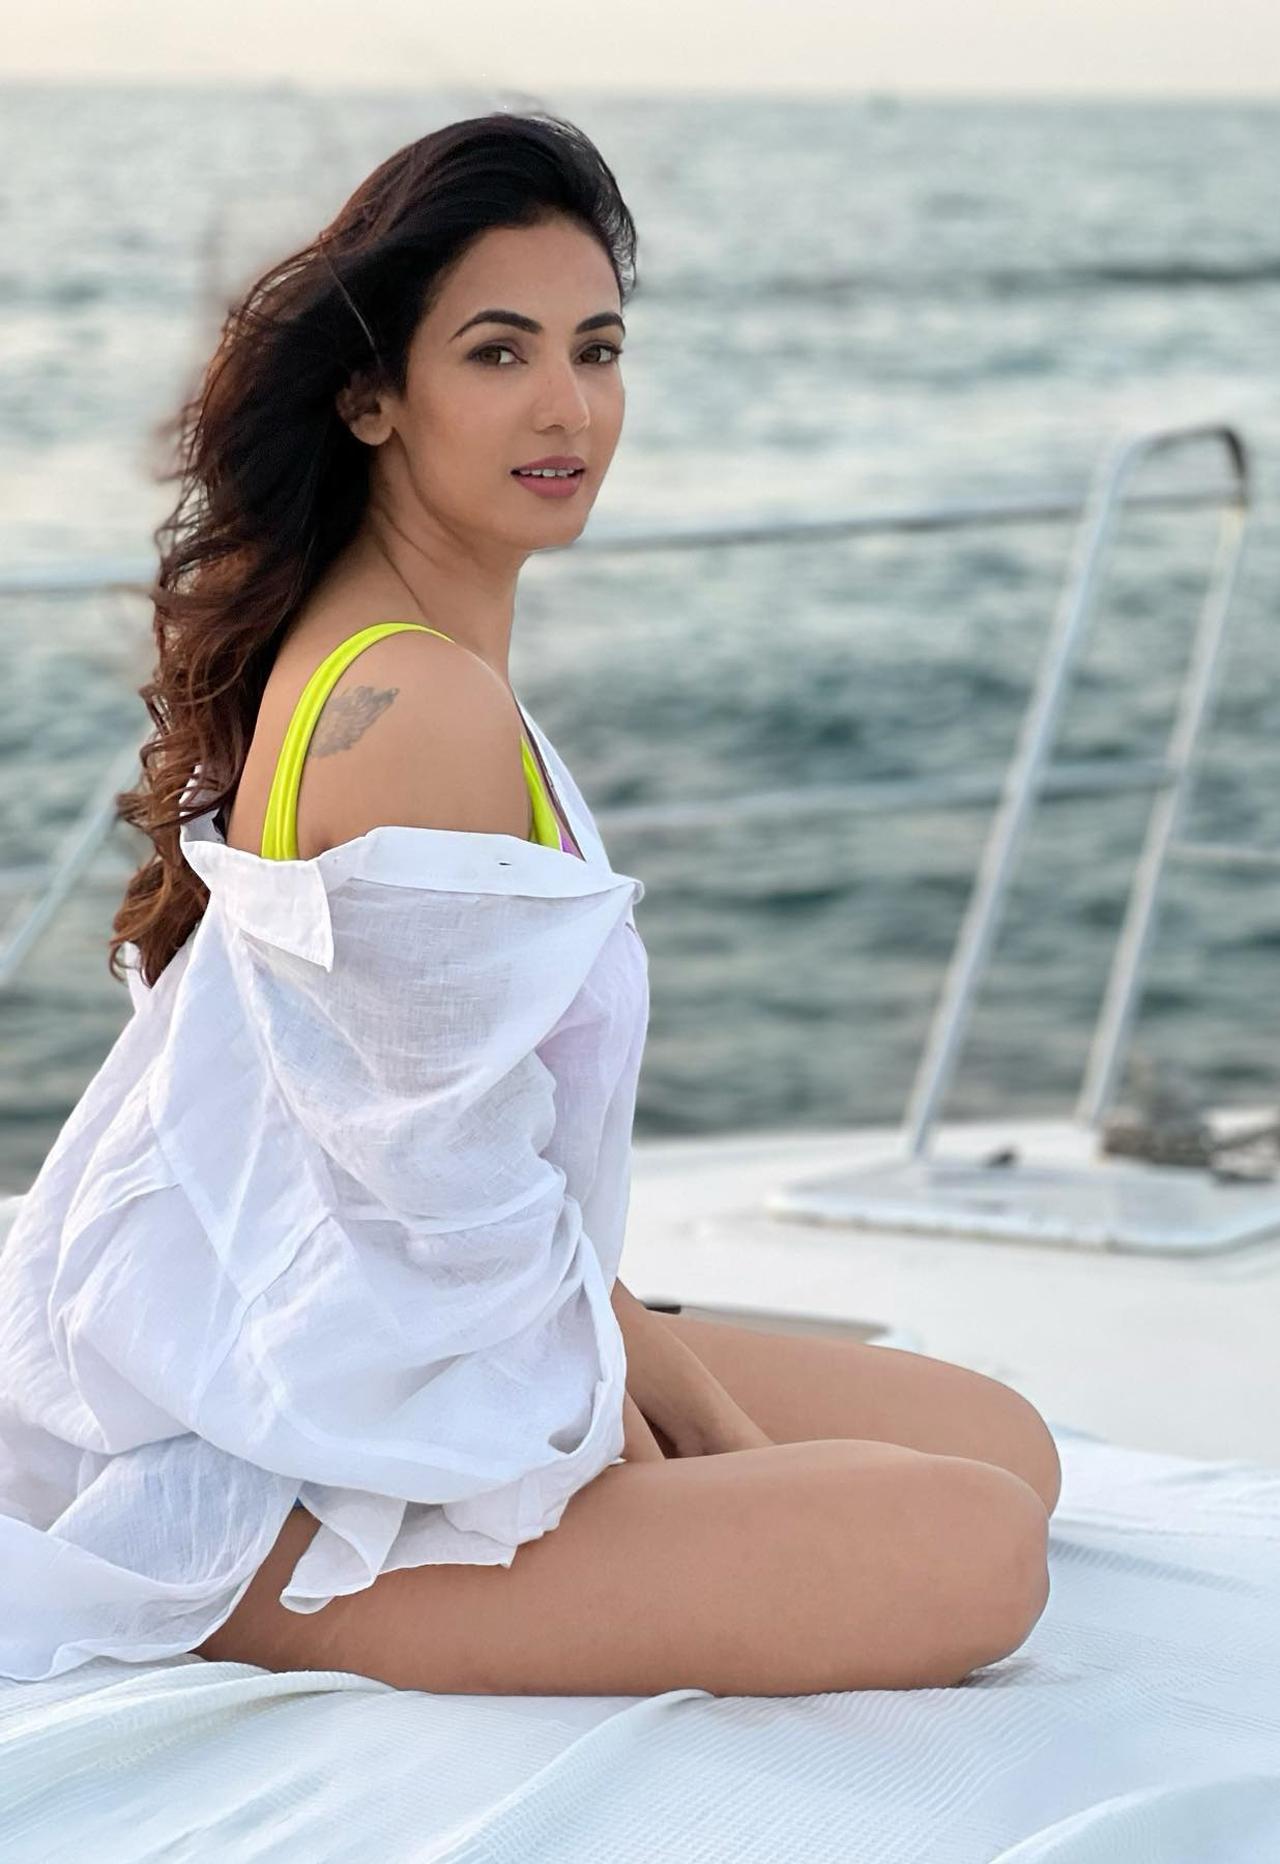 Sonal Chauhan turns 35 today. She may be away from movies but keeps in touch with fans on social media by sharing some stunning pictures, this being one of them on the beach.